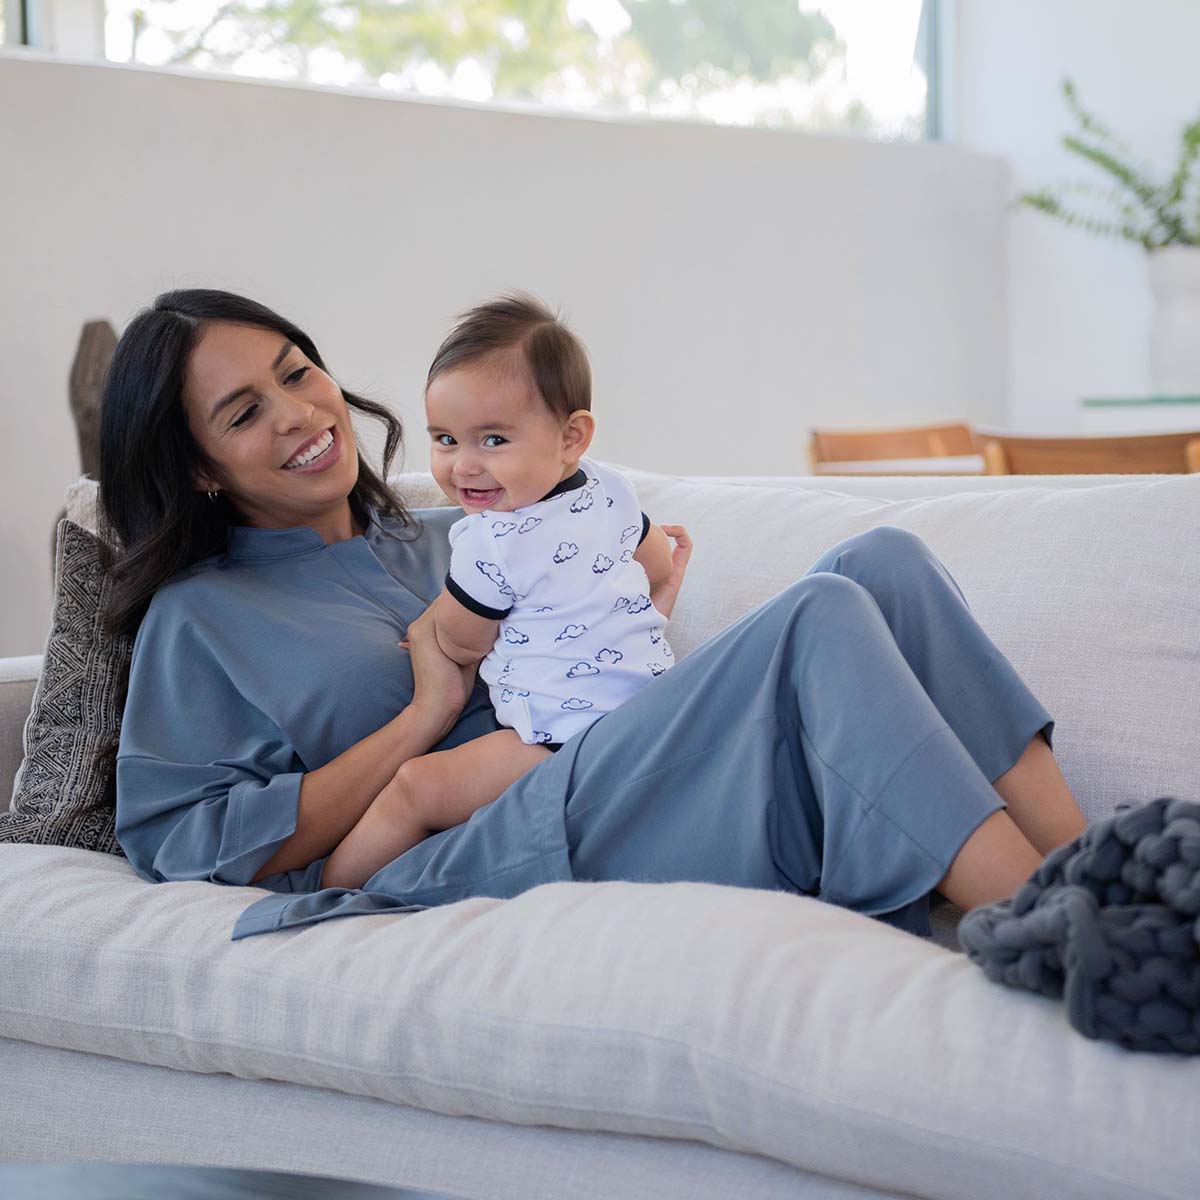 mother with child sitting down in lounge set attire